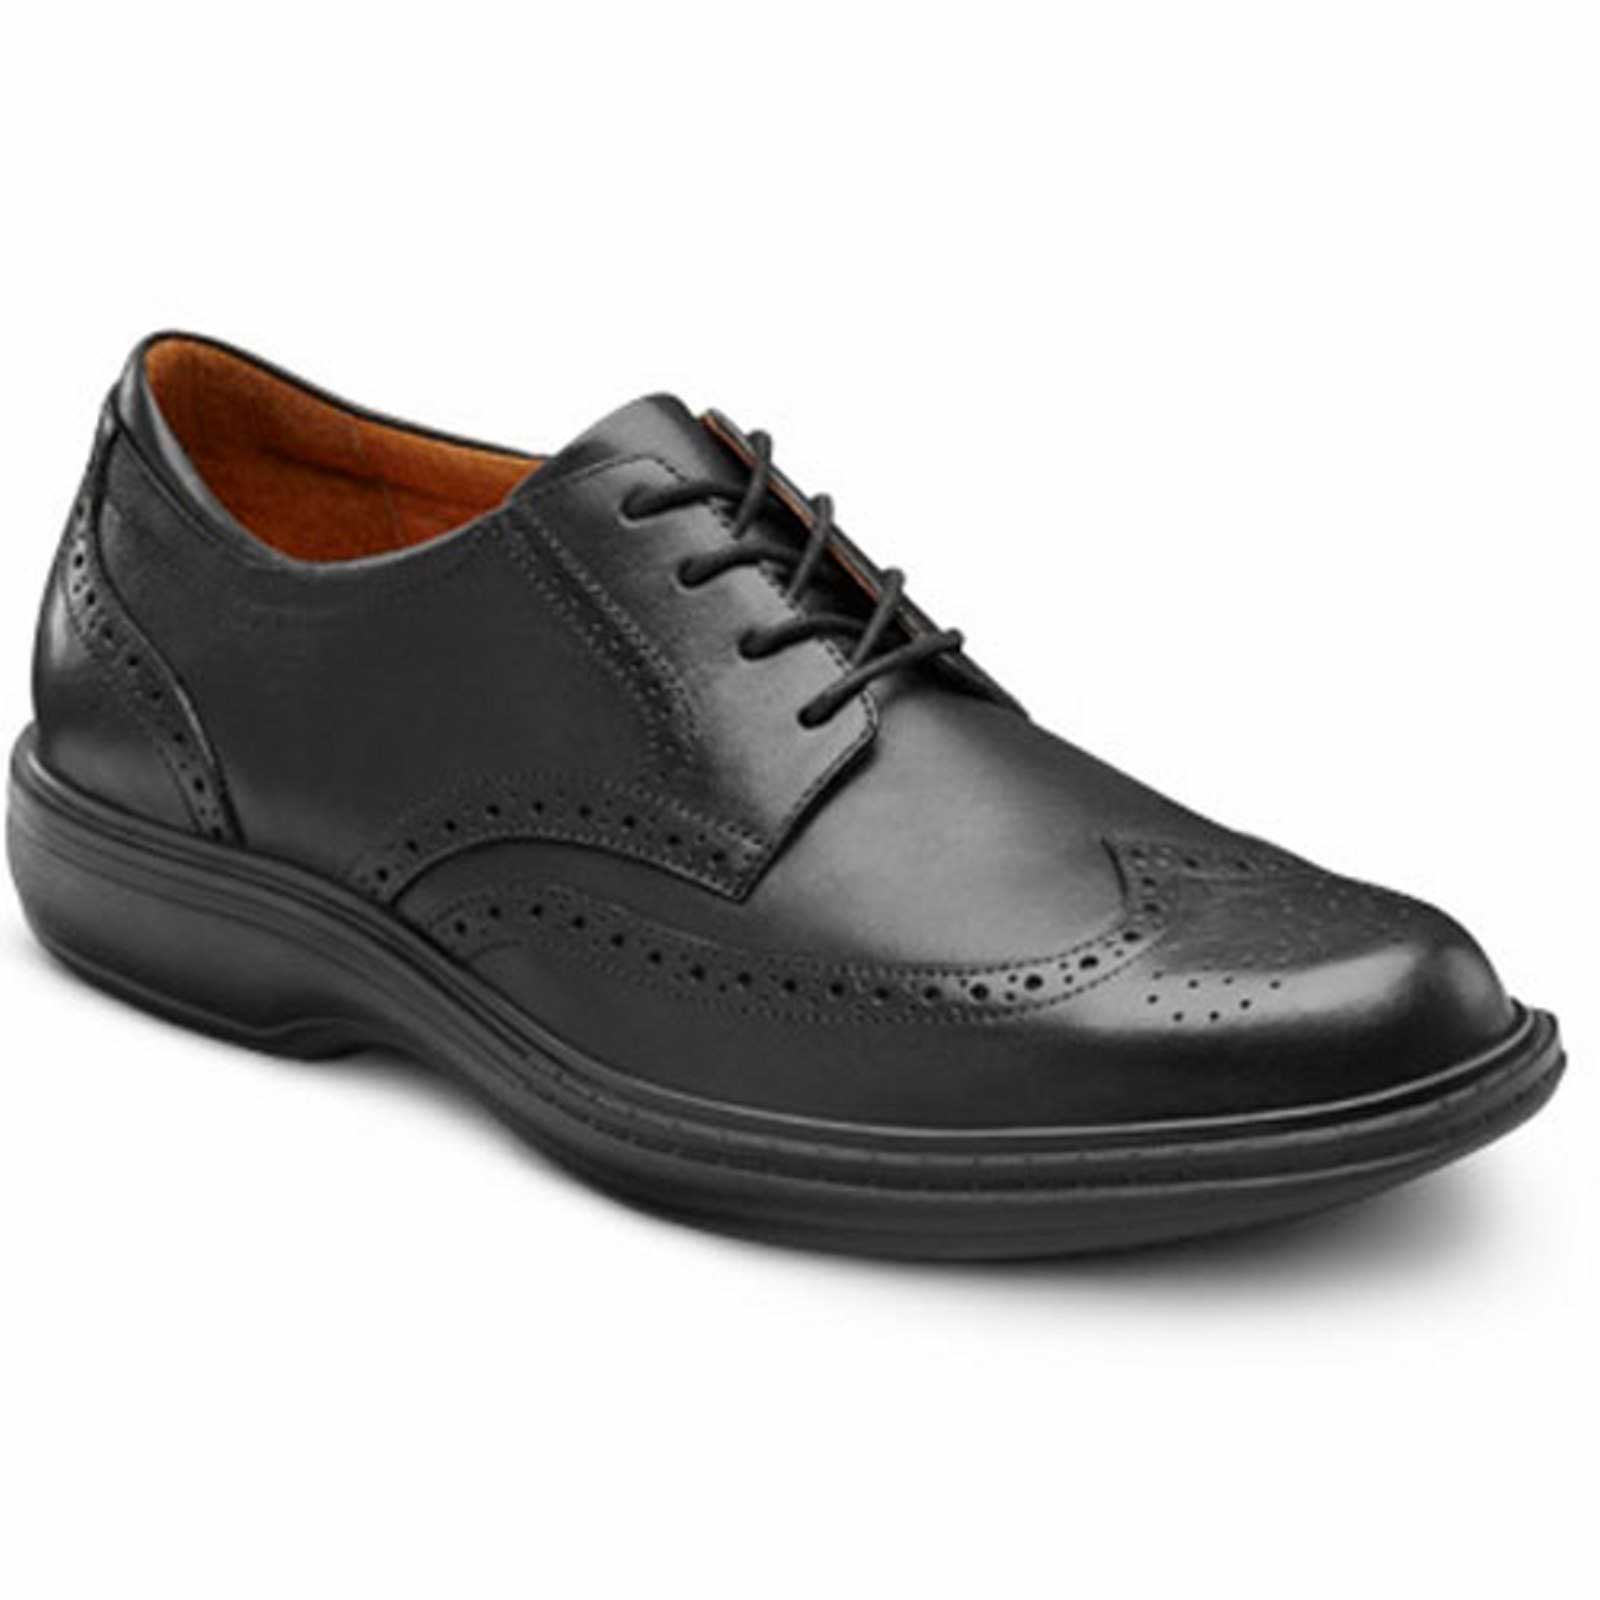 comfortable wingtip shoes